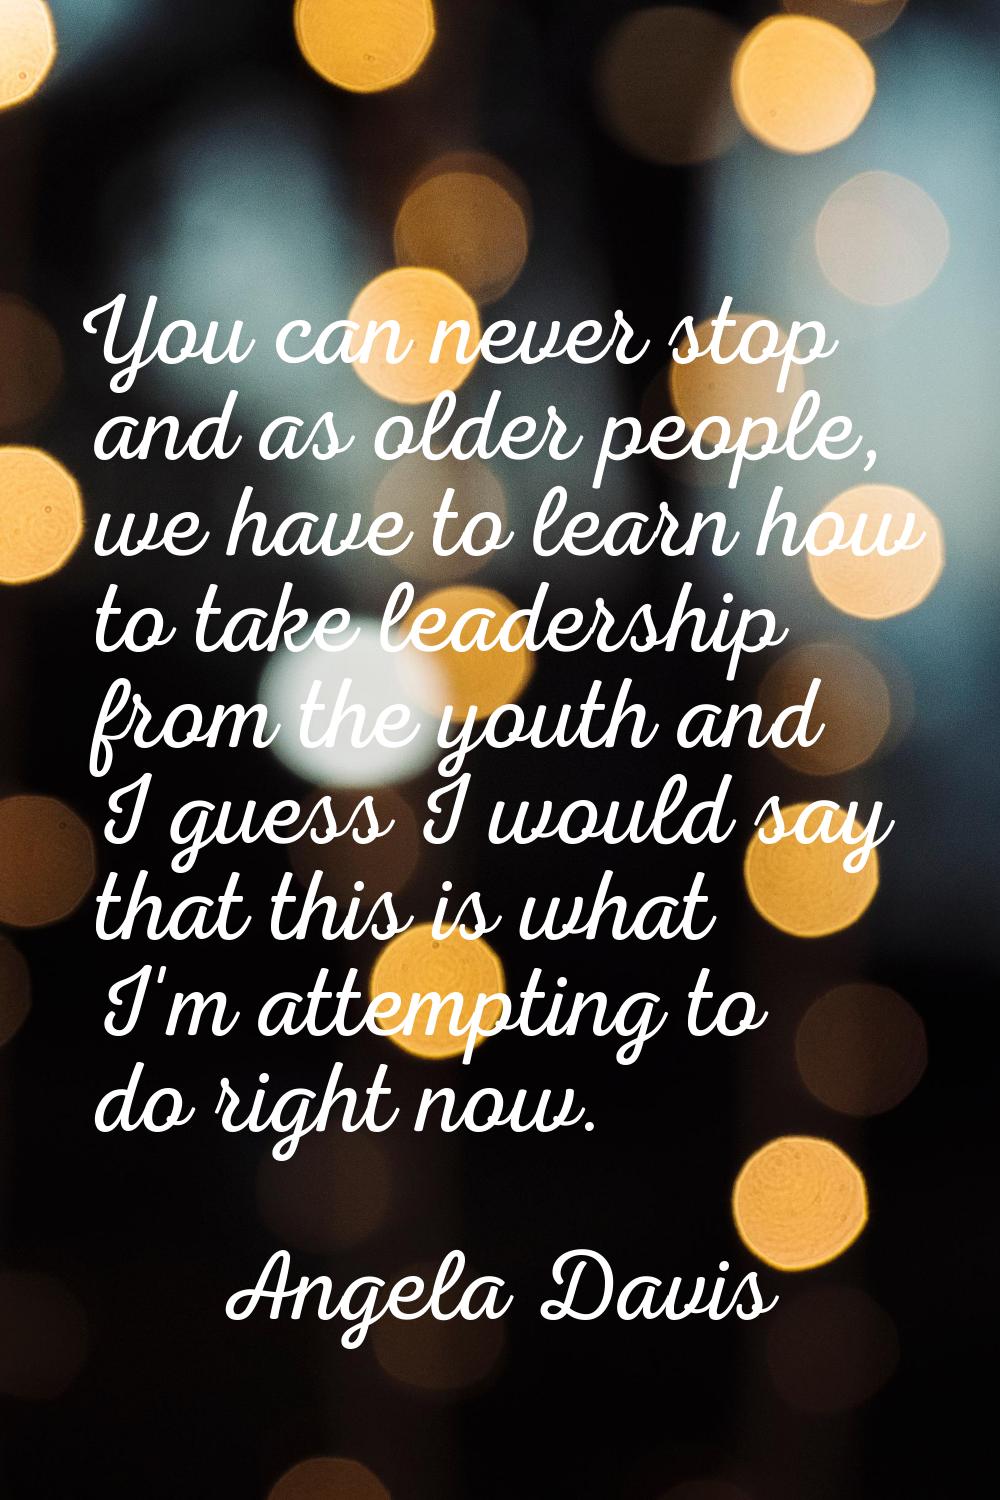 You can never stop and as older people, we have to learn how to take leadership from the youth and 